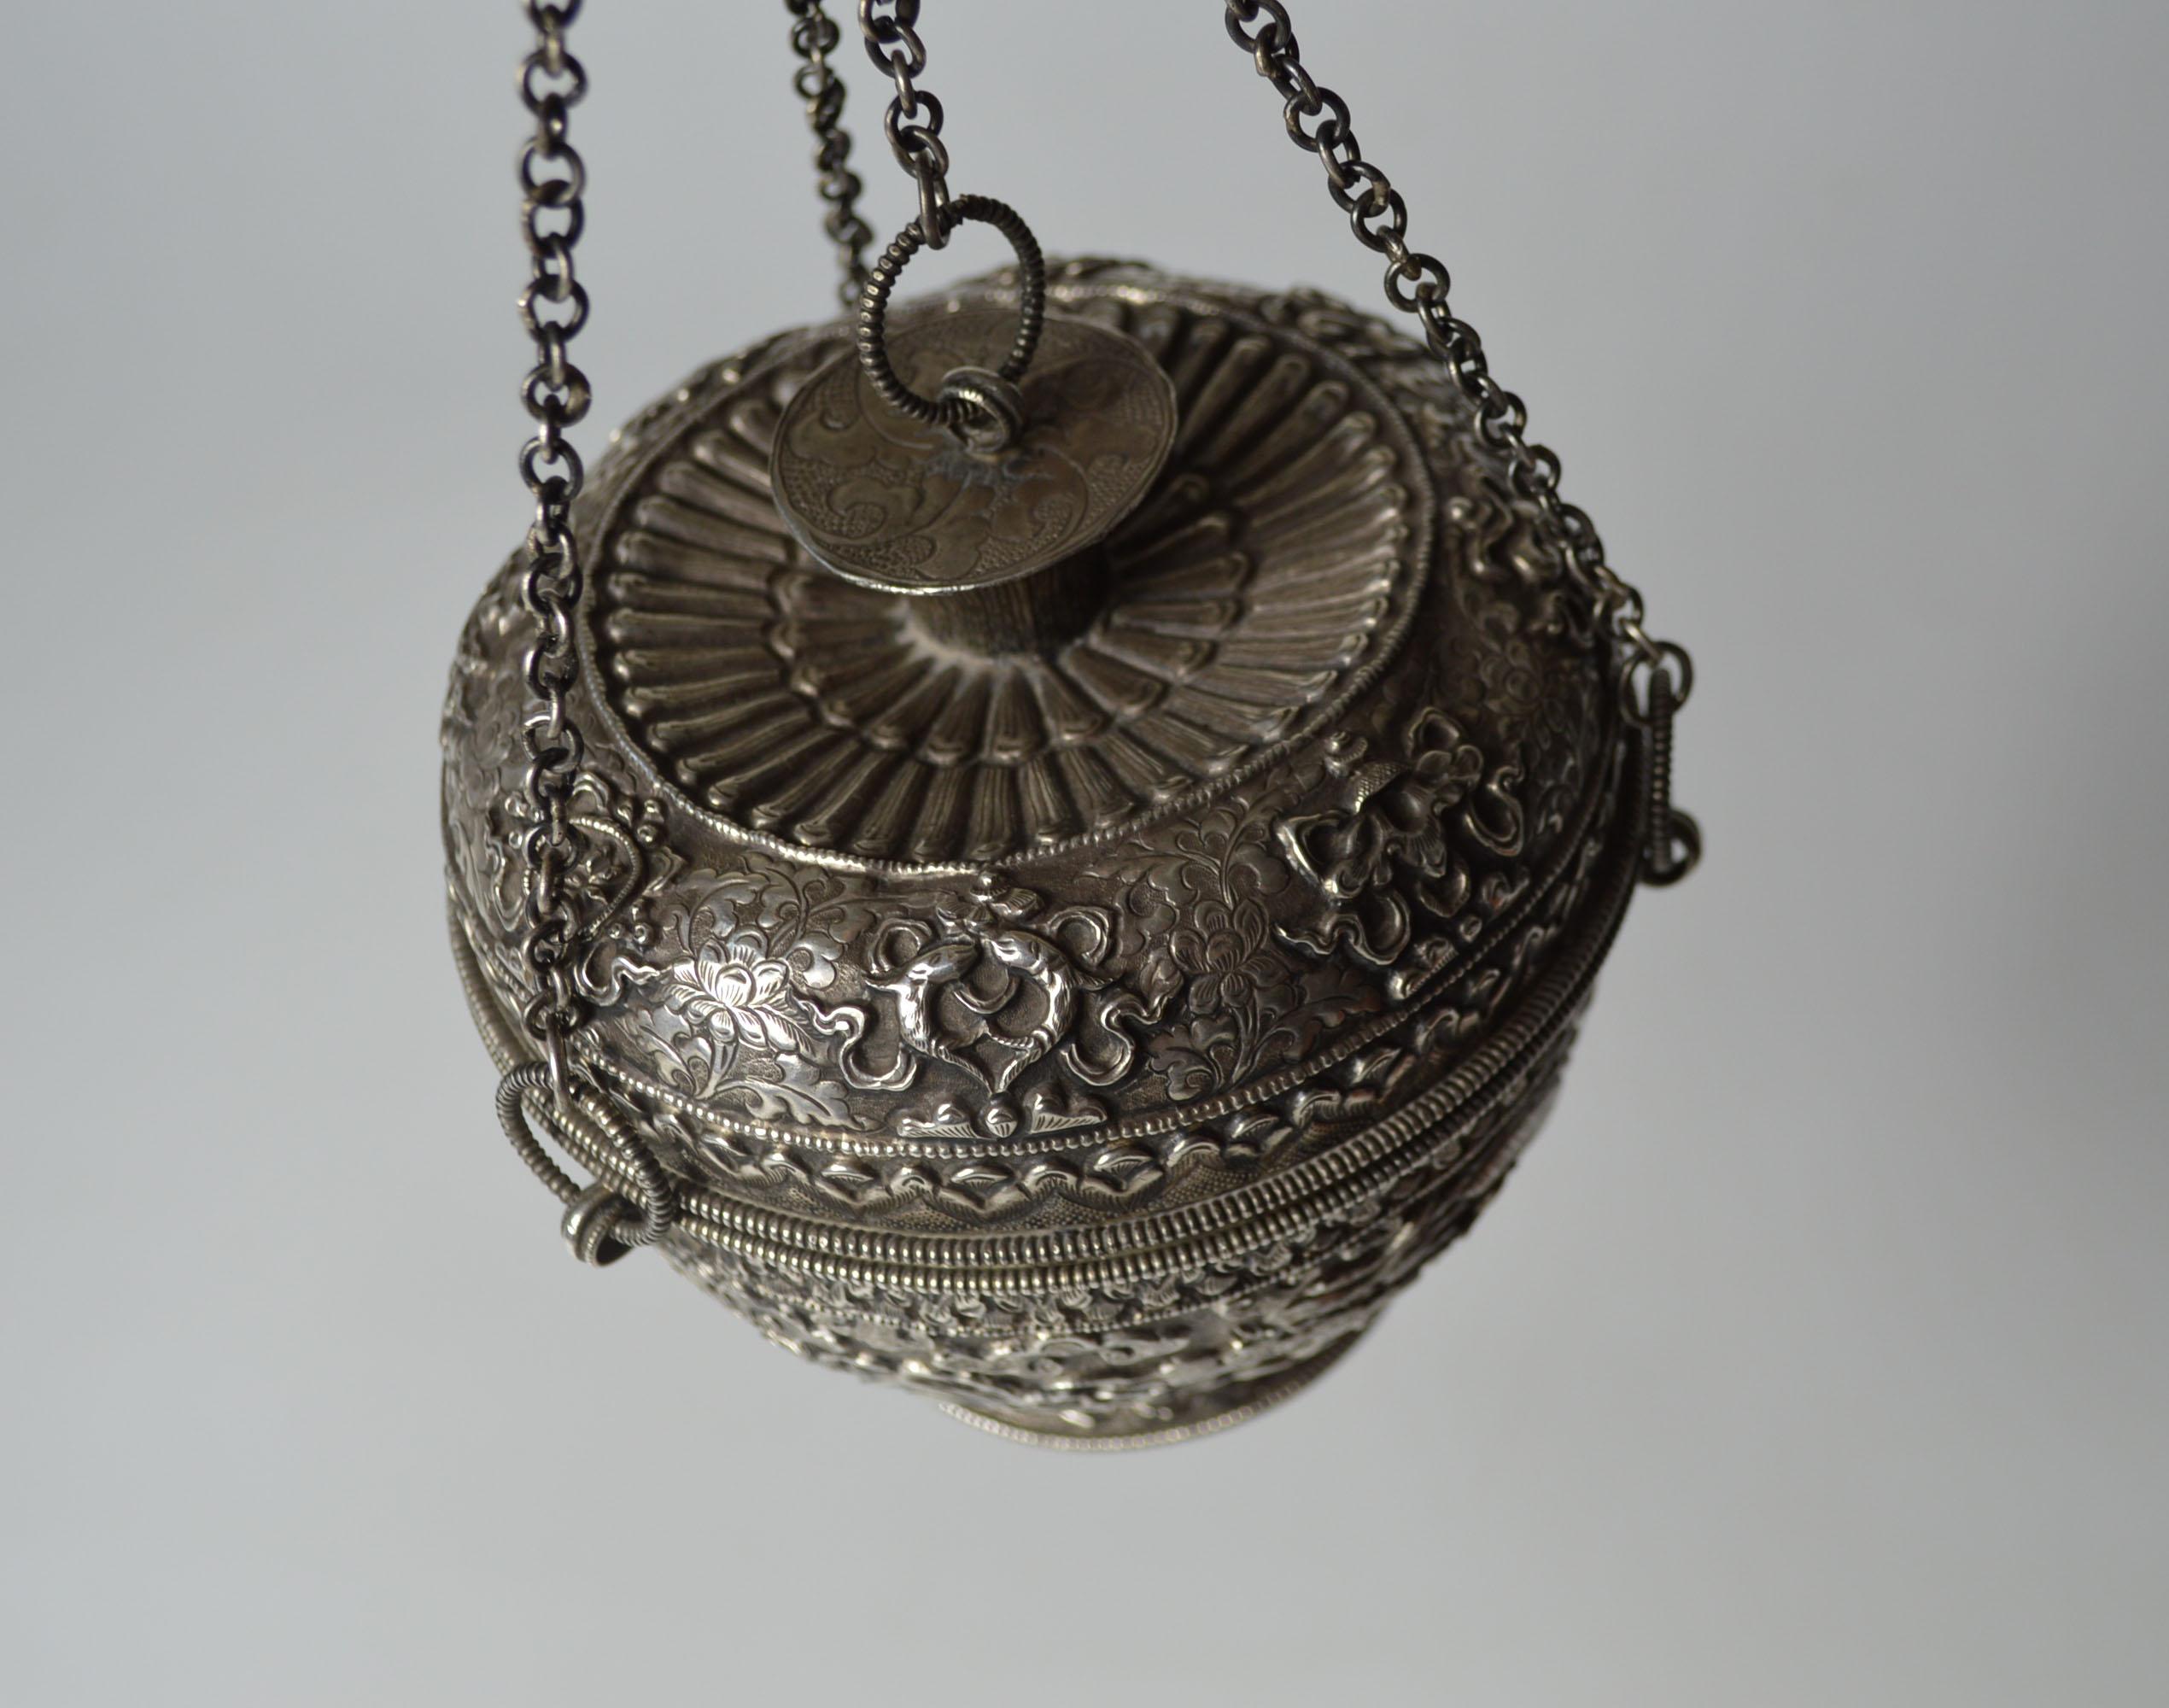 Superb Chinese Sino Tibetan Silver Altar Vessel 19th Century 中国古董 In Good Condition For Sale In London, GB